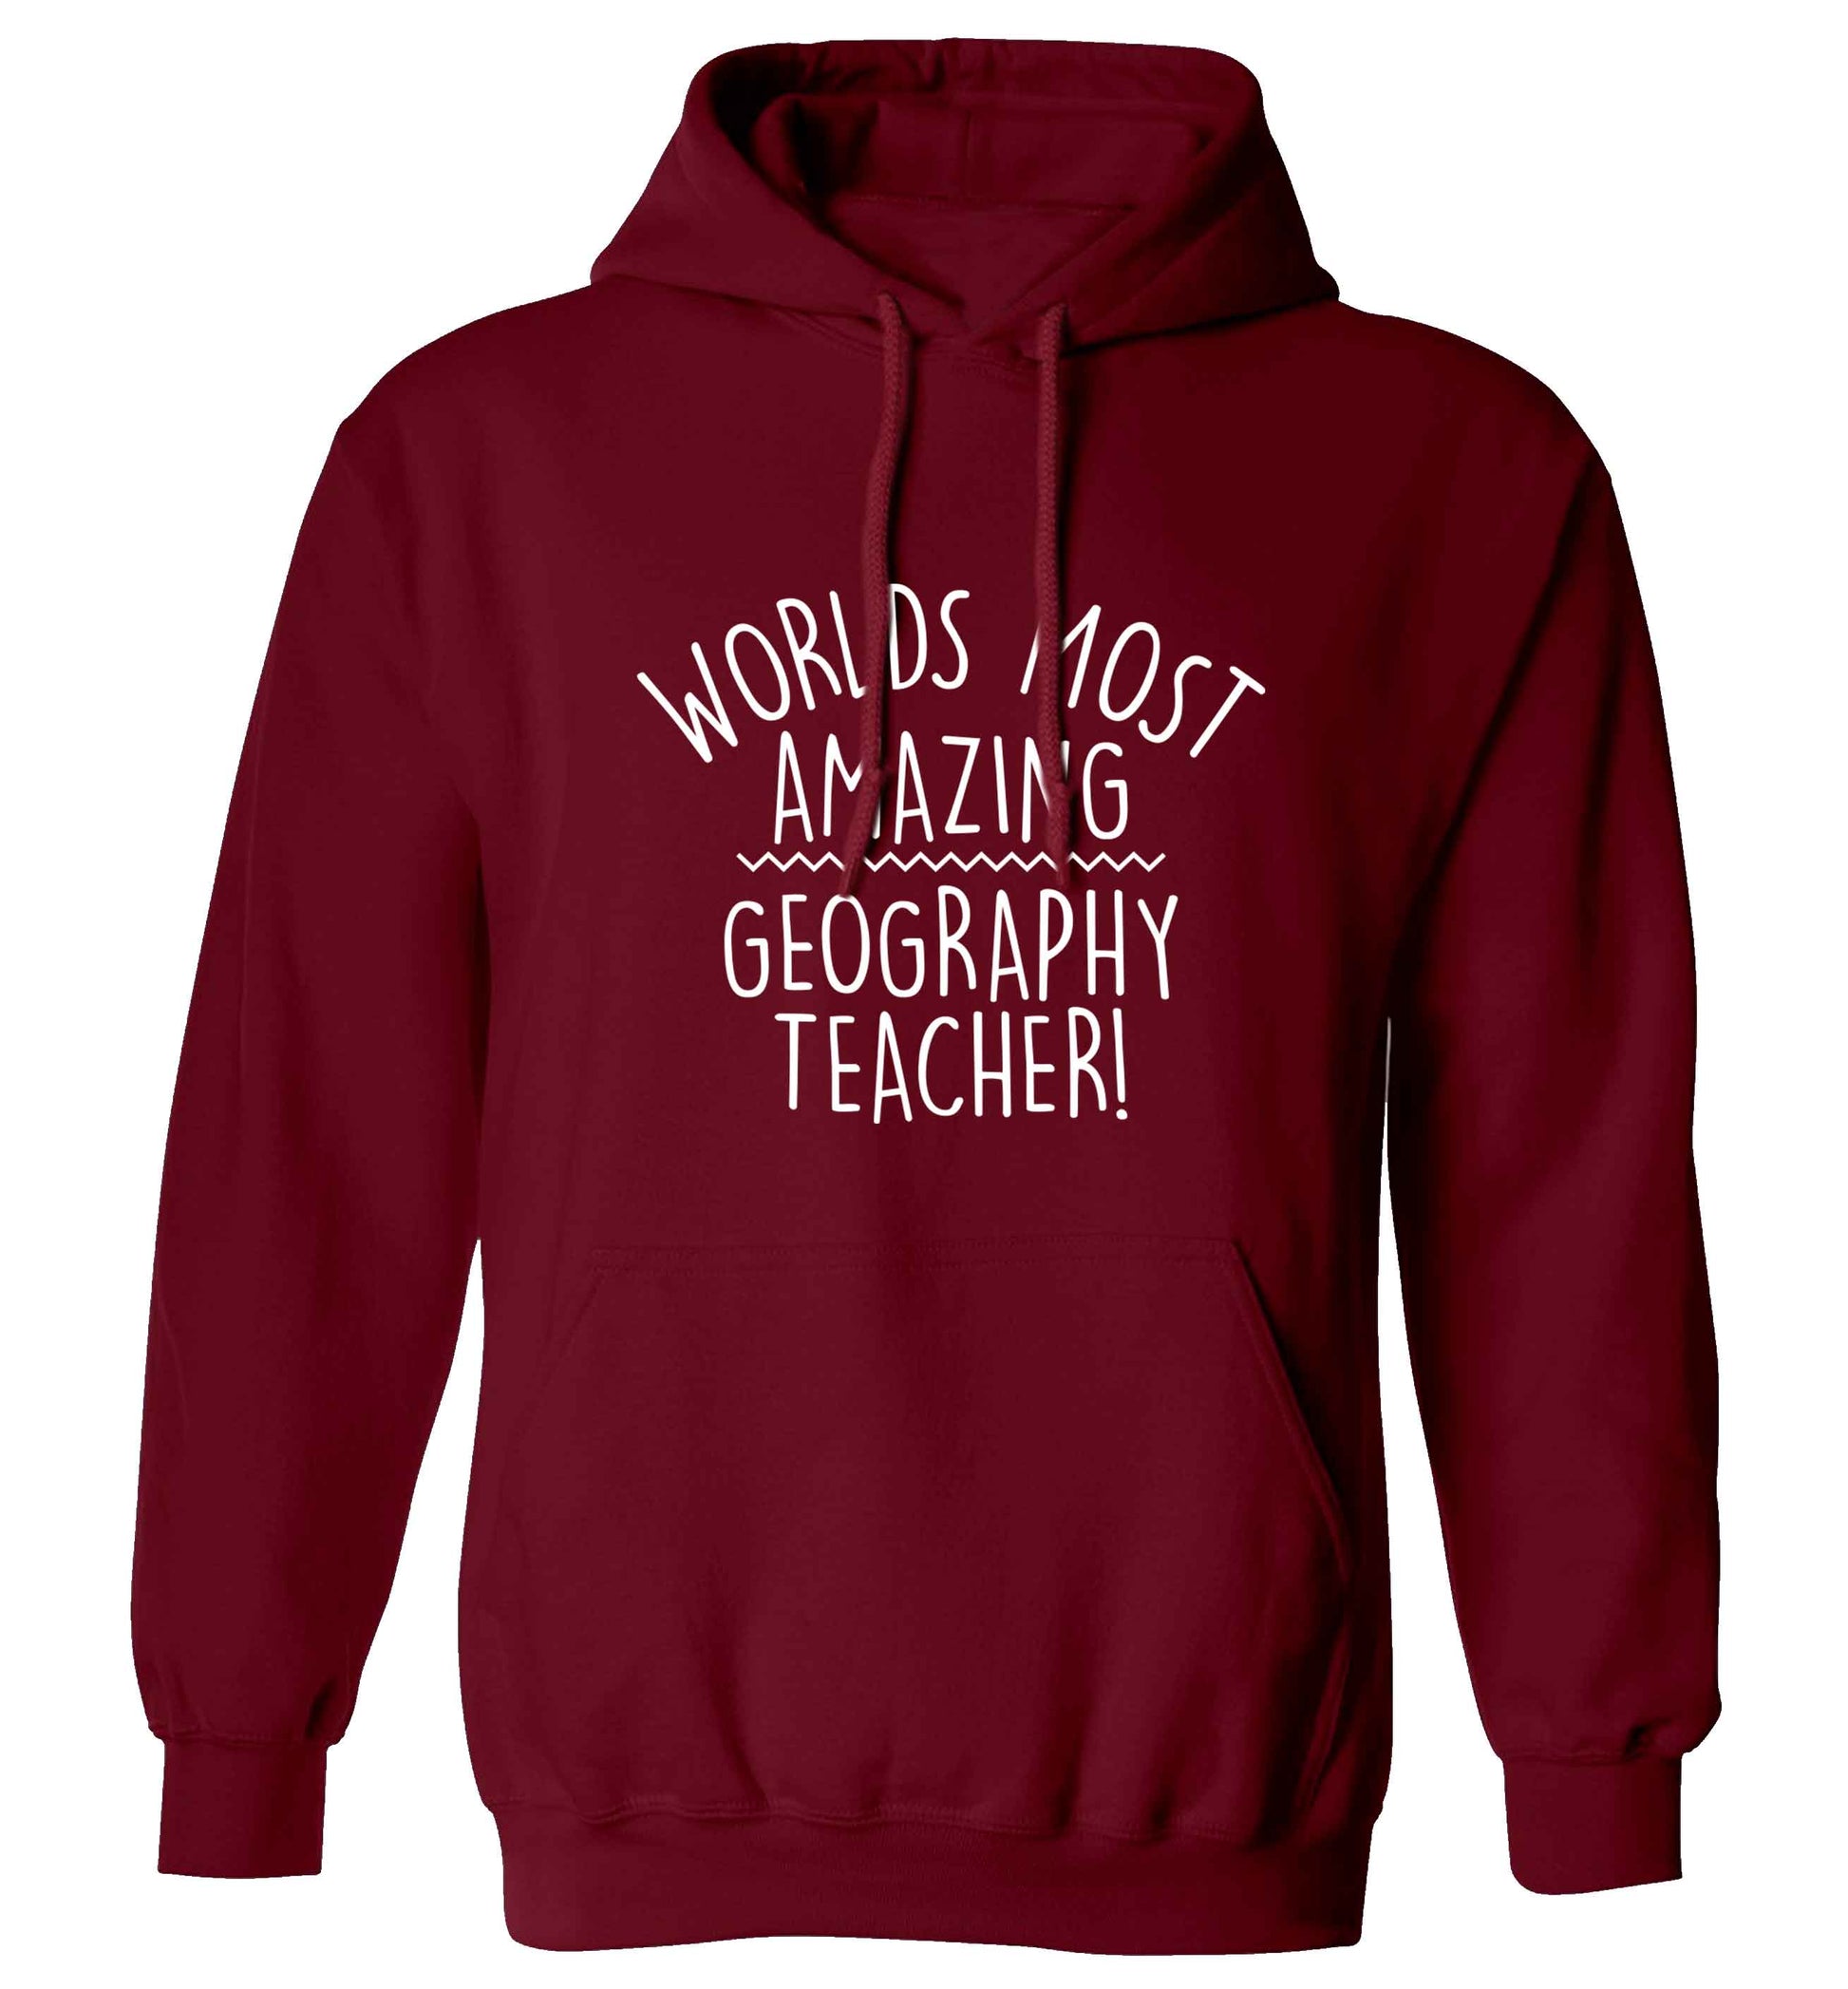 Worlds most amazing geography teacher adults unisex maroon hoodie 2XL